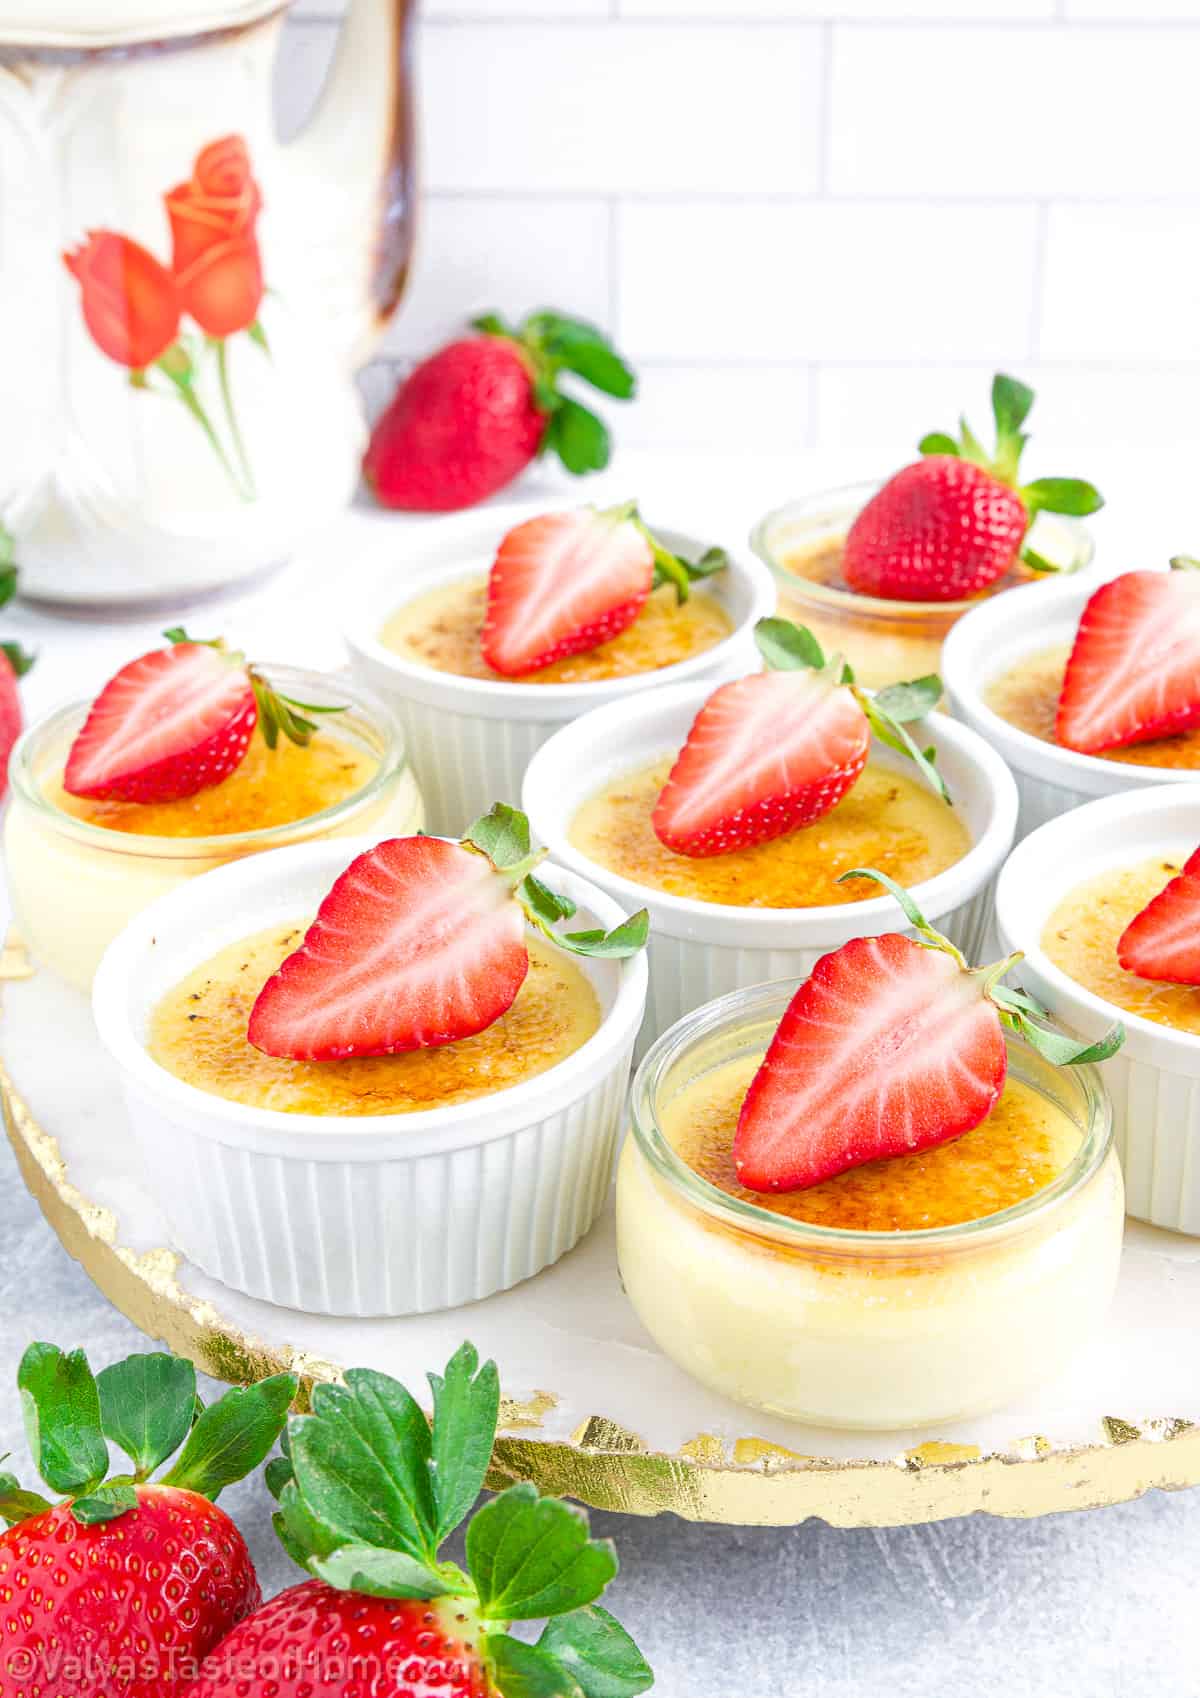 This Vanilla Bean Creme Brulee is a classic dessert that’s delicious, easy to make, and perfect for literally any occasion! It has a rich, creamy custard, offset by a layer of hard caramelized sugar that's a delight to crack into.